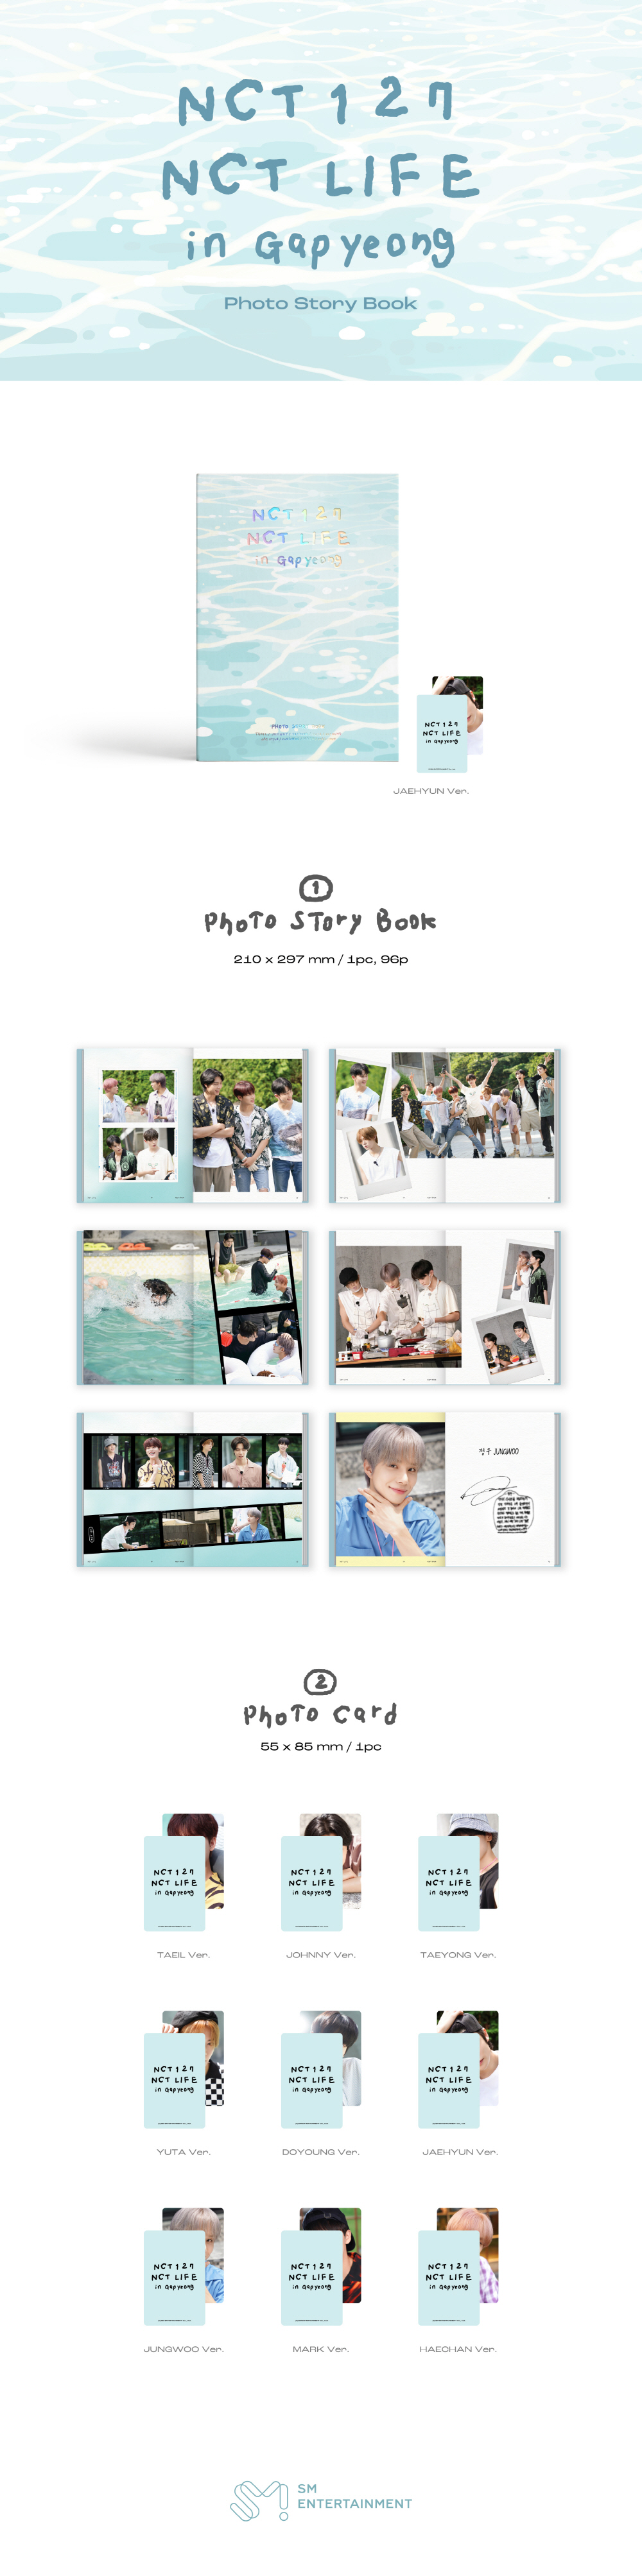 NCT 127 [NCT LIFE in Gapyeong] PHOTO STORY BOOK (JUNGWOO) nct nct127 photobook nct127goods nct127photocard NCT127Gapyeong Gapyeong PHOTOSTORYBOOK NCT127photobook NCT127photostorybook